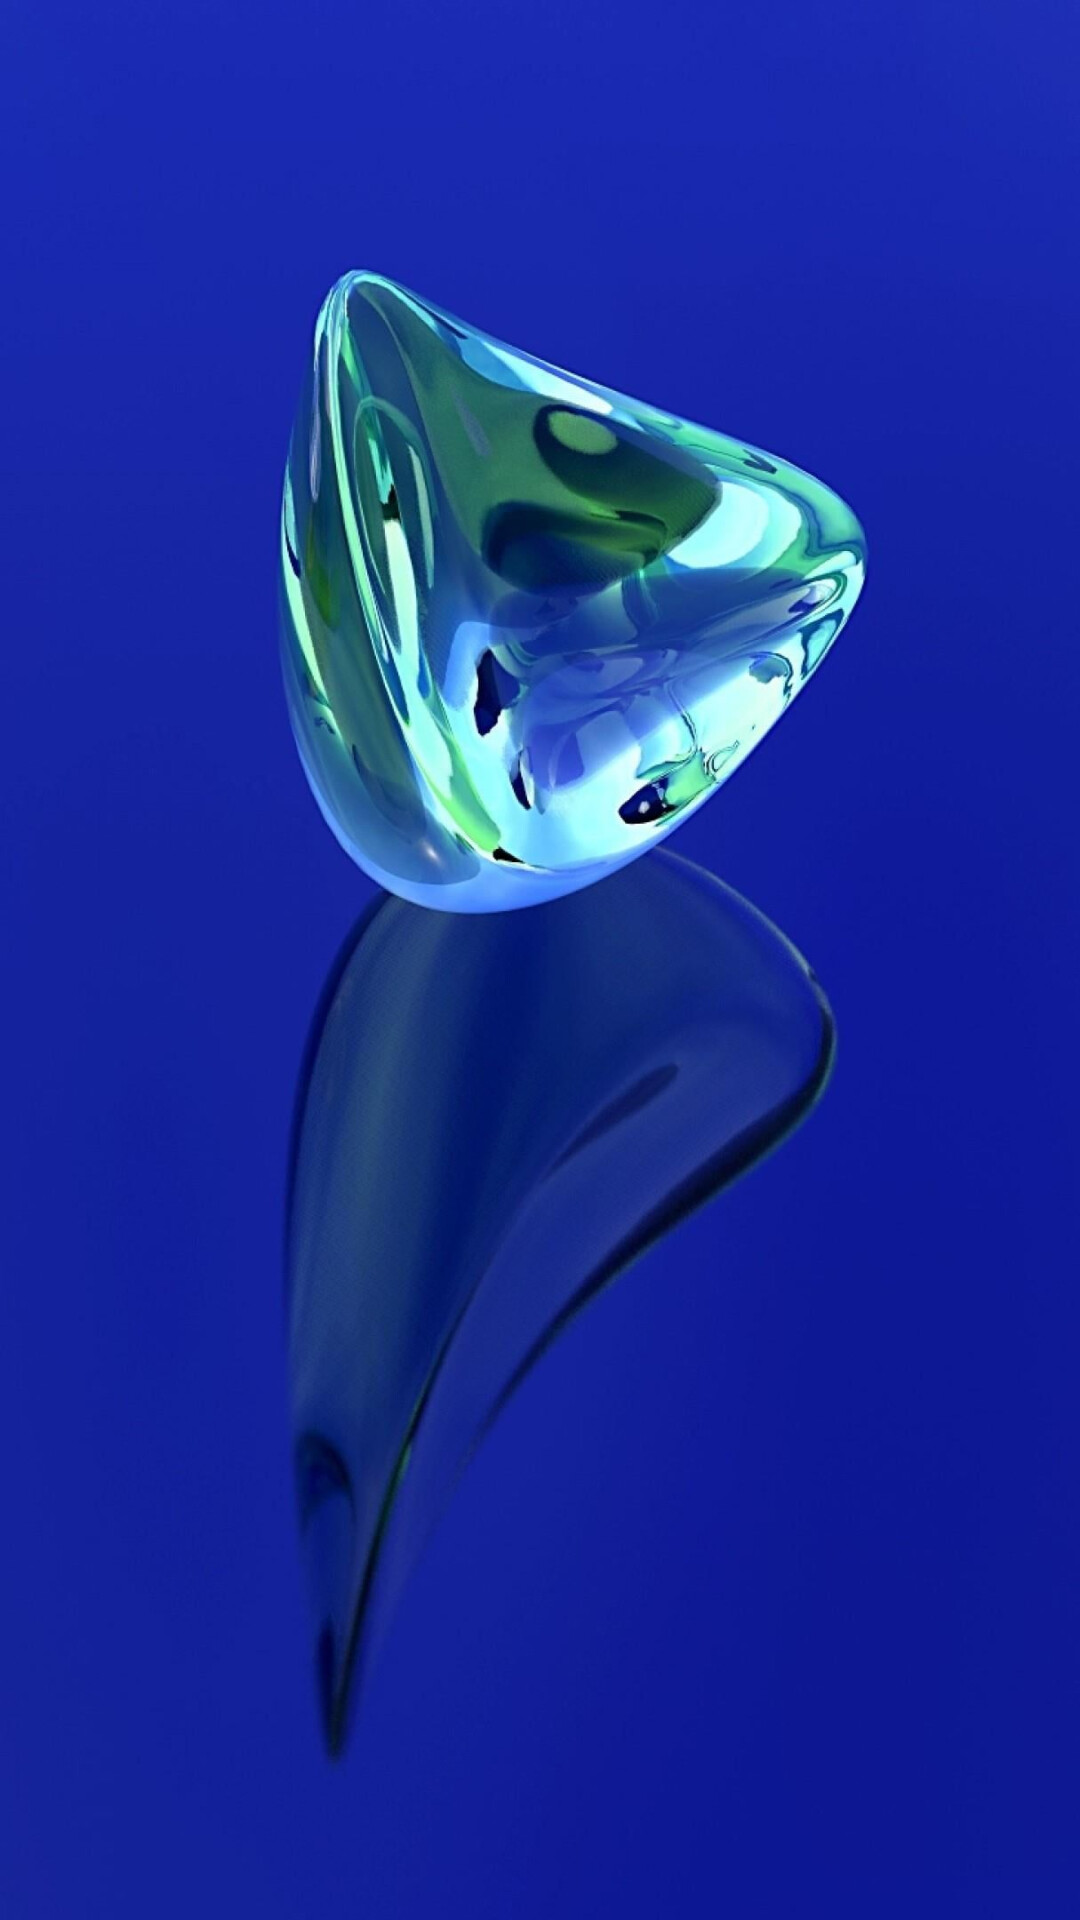 Glass: Blue gemstone, Reflection, A natural material produced by fast cooling of magma. 1080x1920 Full HD Background.